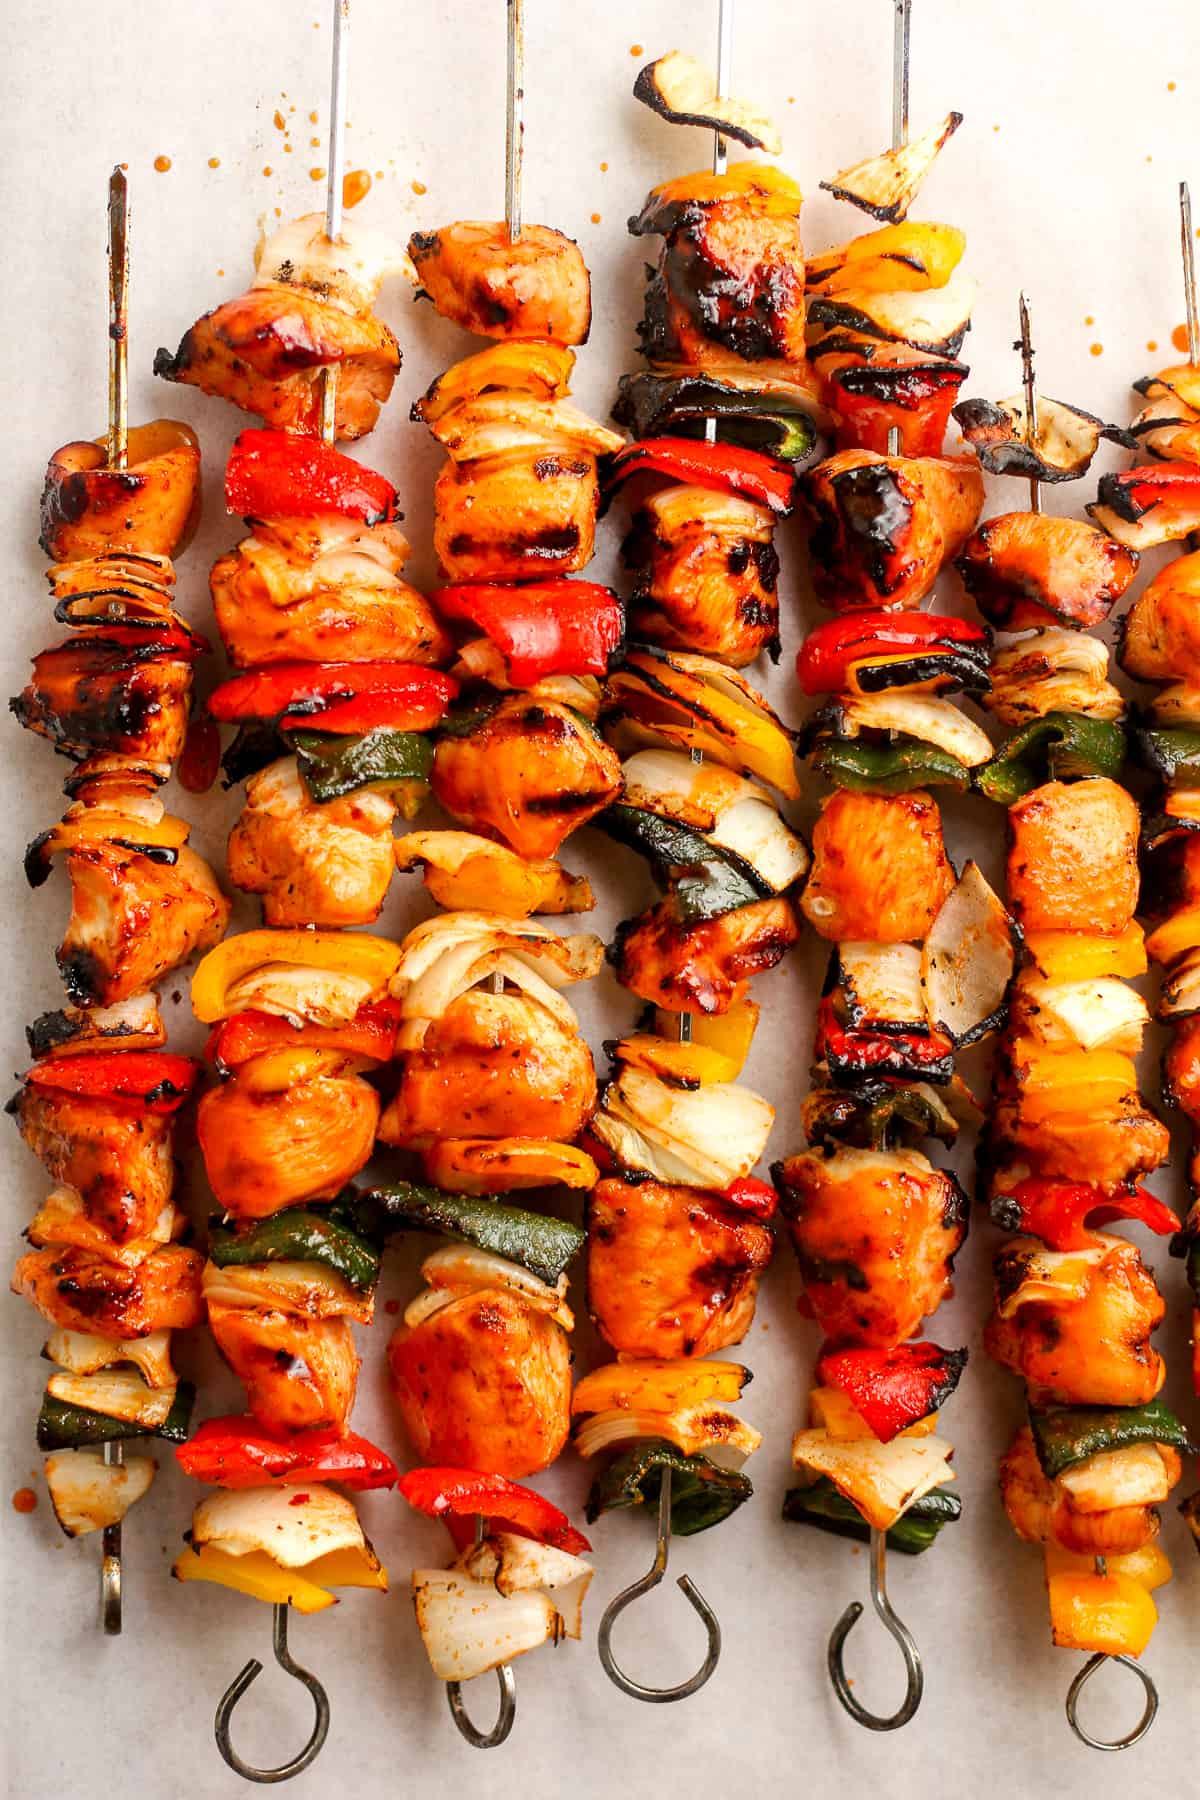 Closeup on the grilled chicken kabobs.